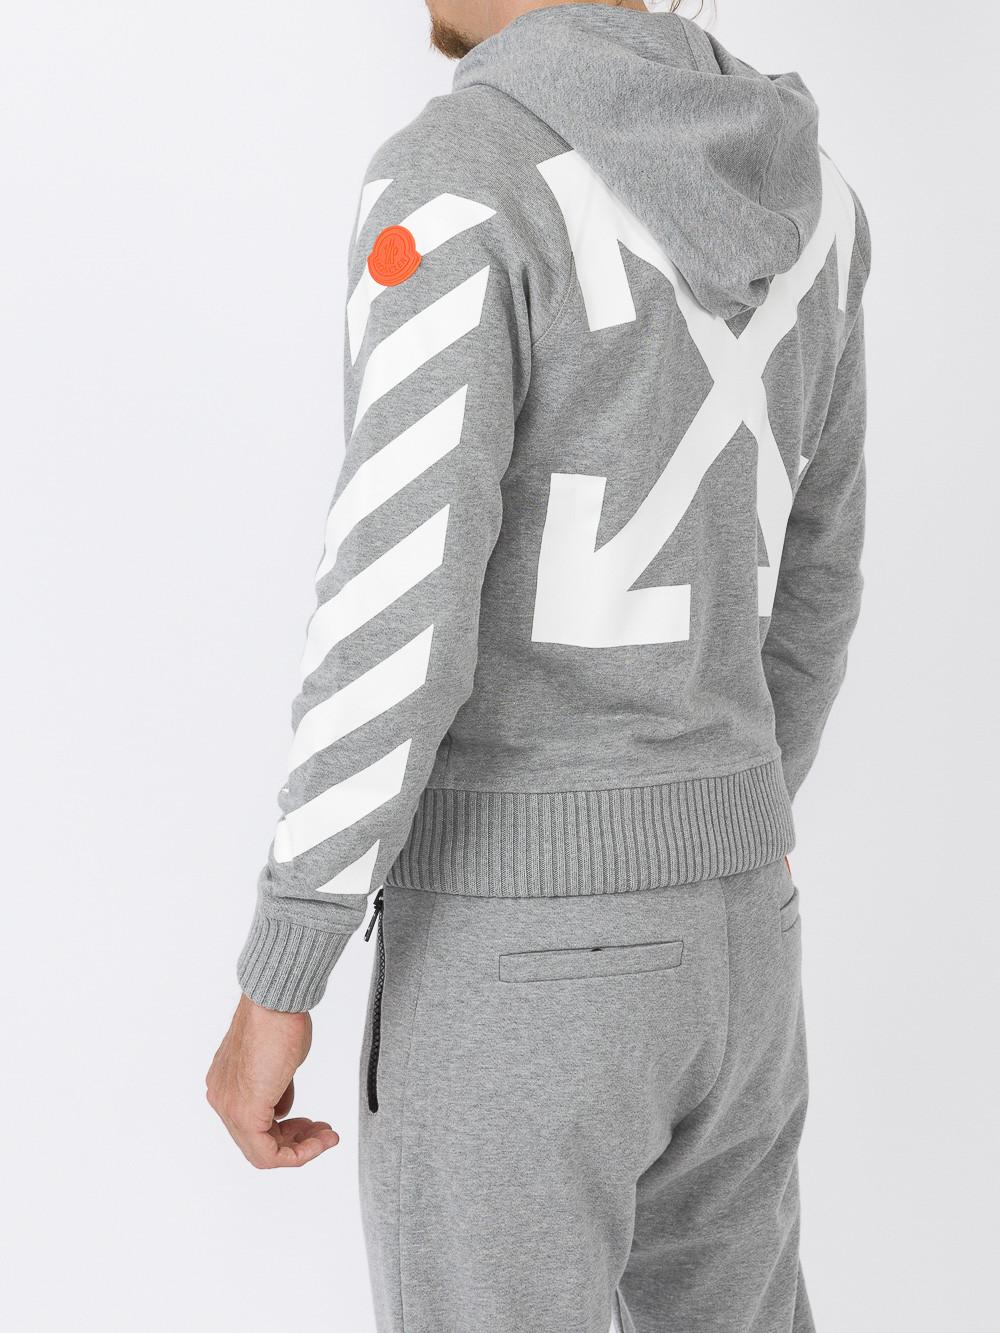 Moncler Cotton X Off-white Printed Zip-up Hoodie in Gray for Men - Lyst